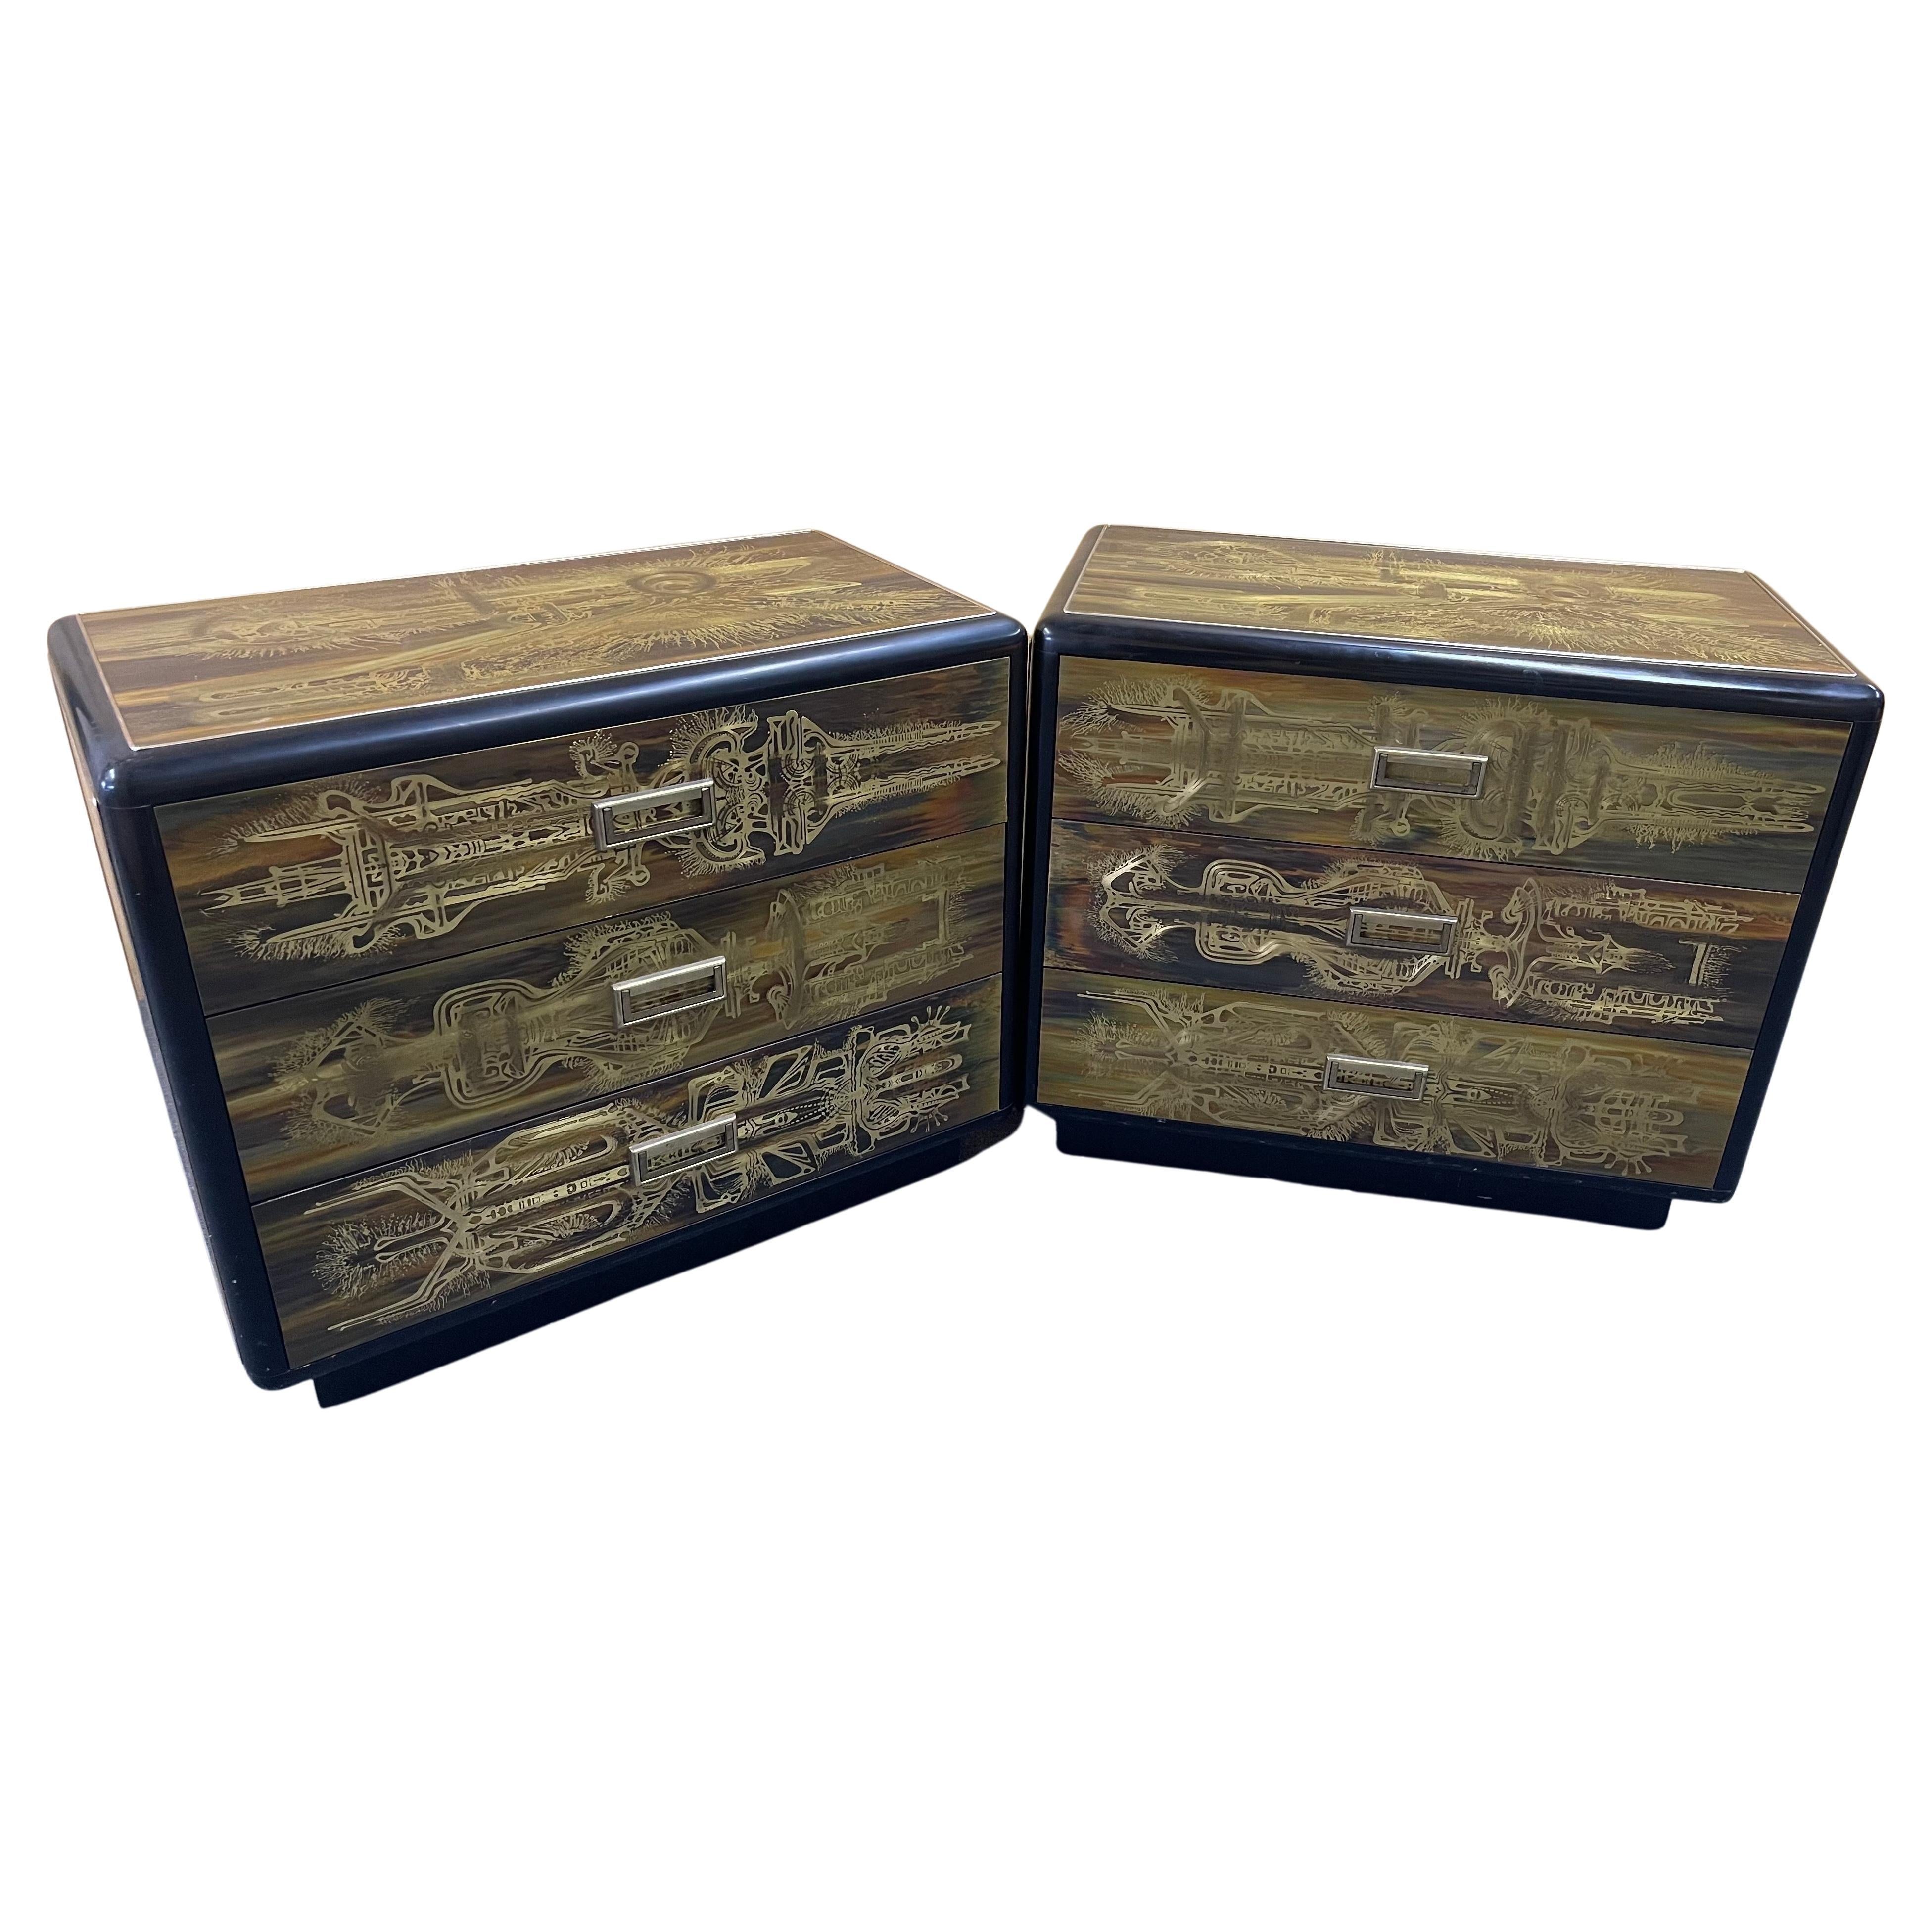 An nice and rare pair of acid-etched brass with ebony lacquer three drawer dressers / commodes by Bernhard Rohne for Mastercraft, circa 1970s. Covering each case are abstract designs in Rohne's signature surface treatment of acid-etched brass and